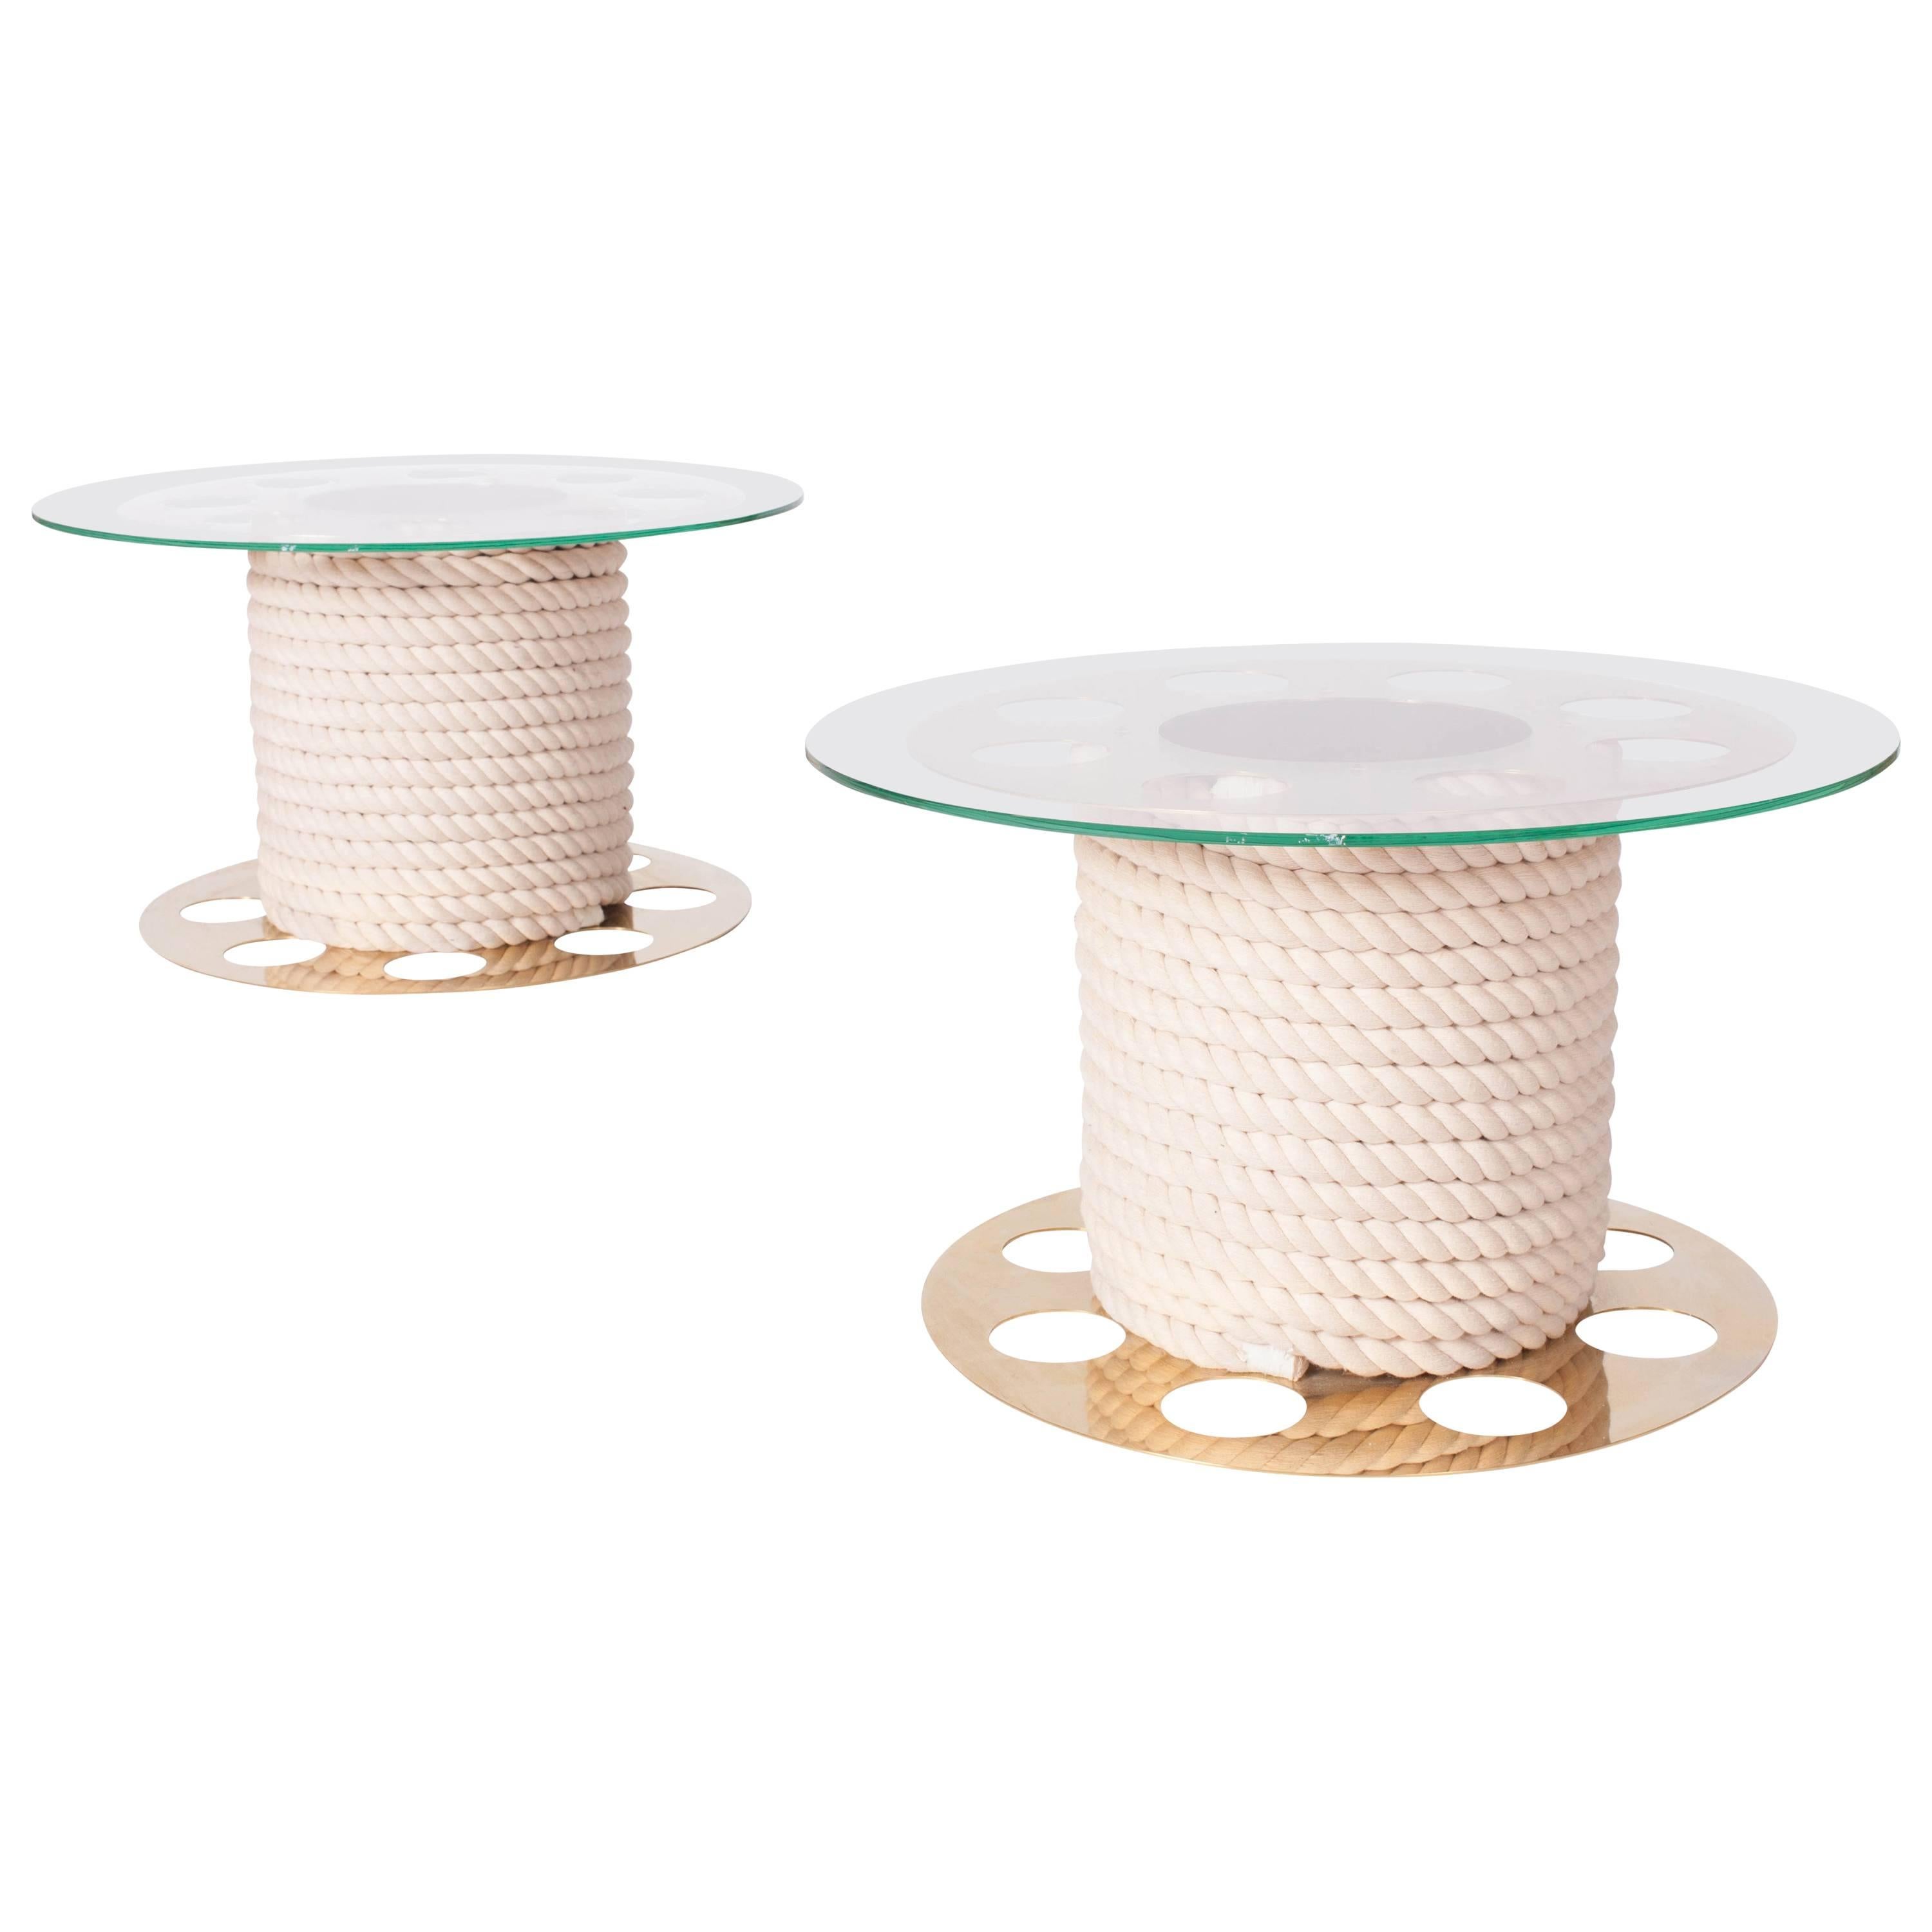 Hollywood regency side tables by Paco Rabanne